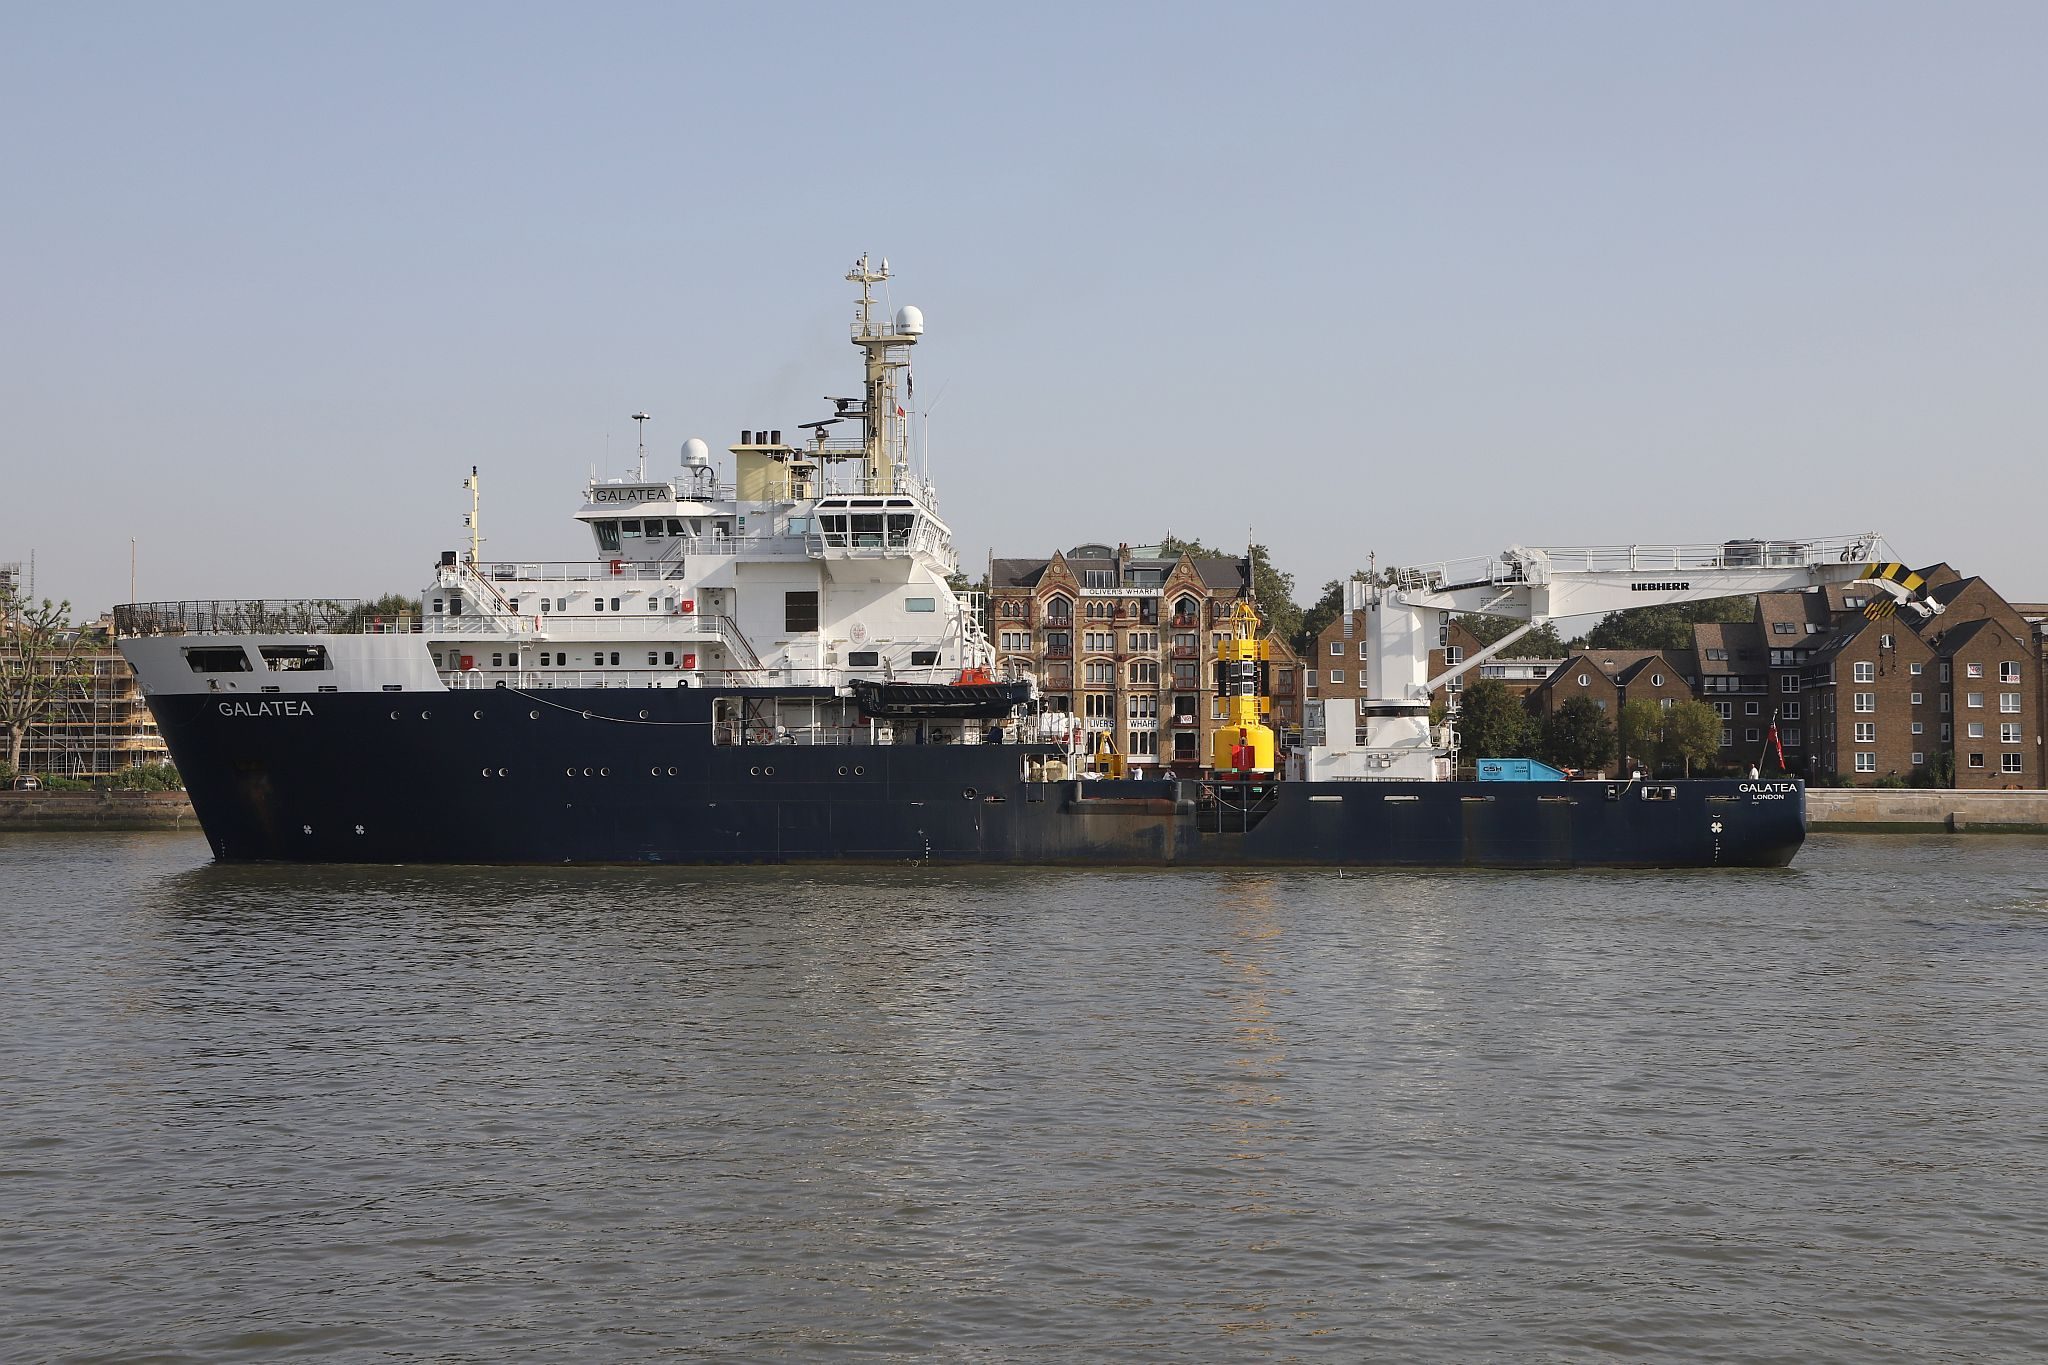 Trinity House Vessel Galatea sailing up the River Thames past Wapping towards the Pool of London.